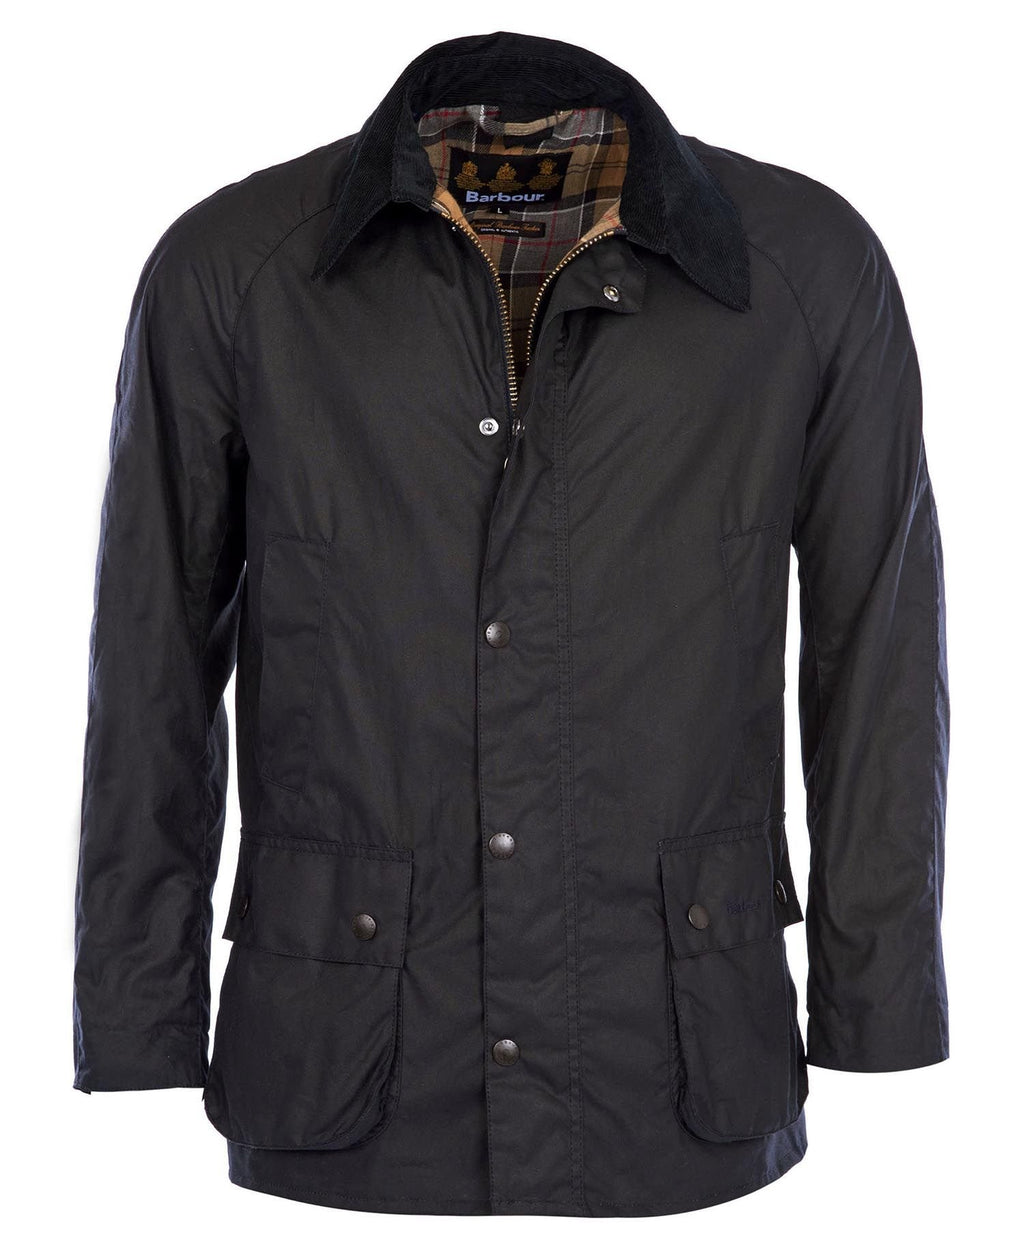 Barbour Ashby Wax jacket for men